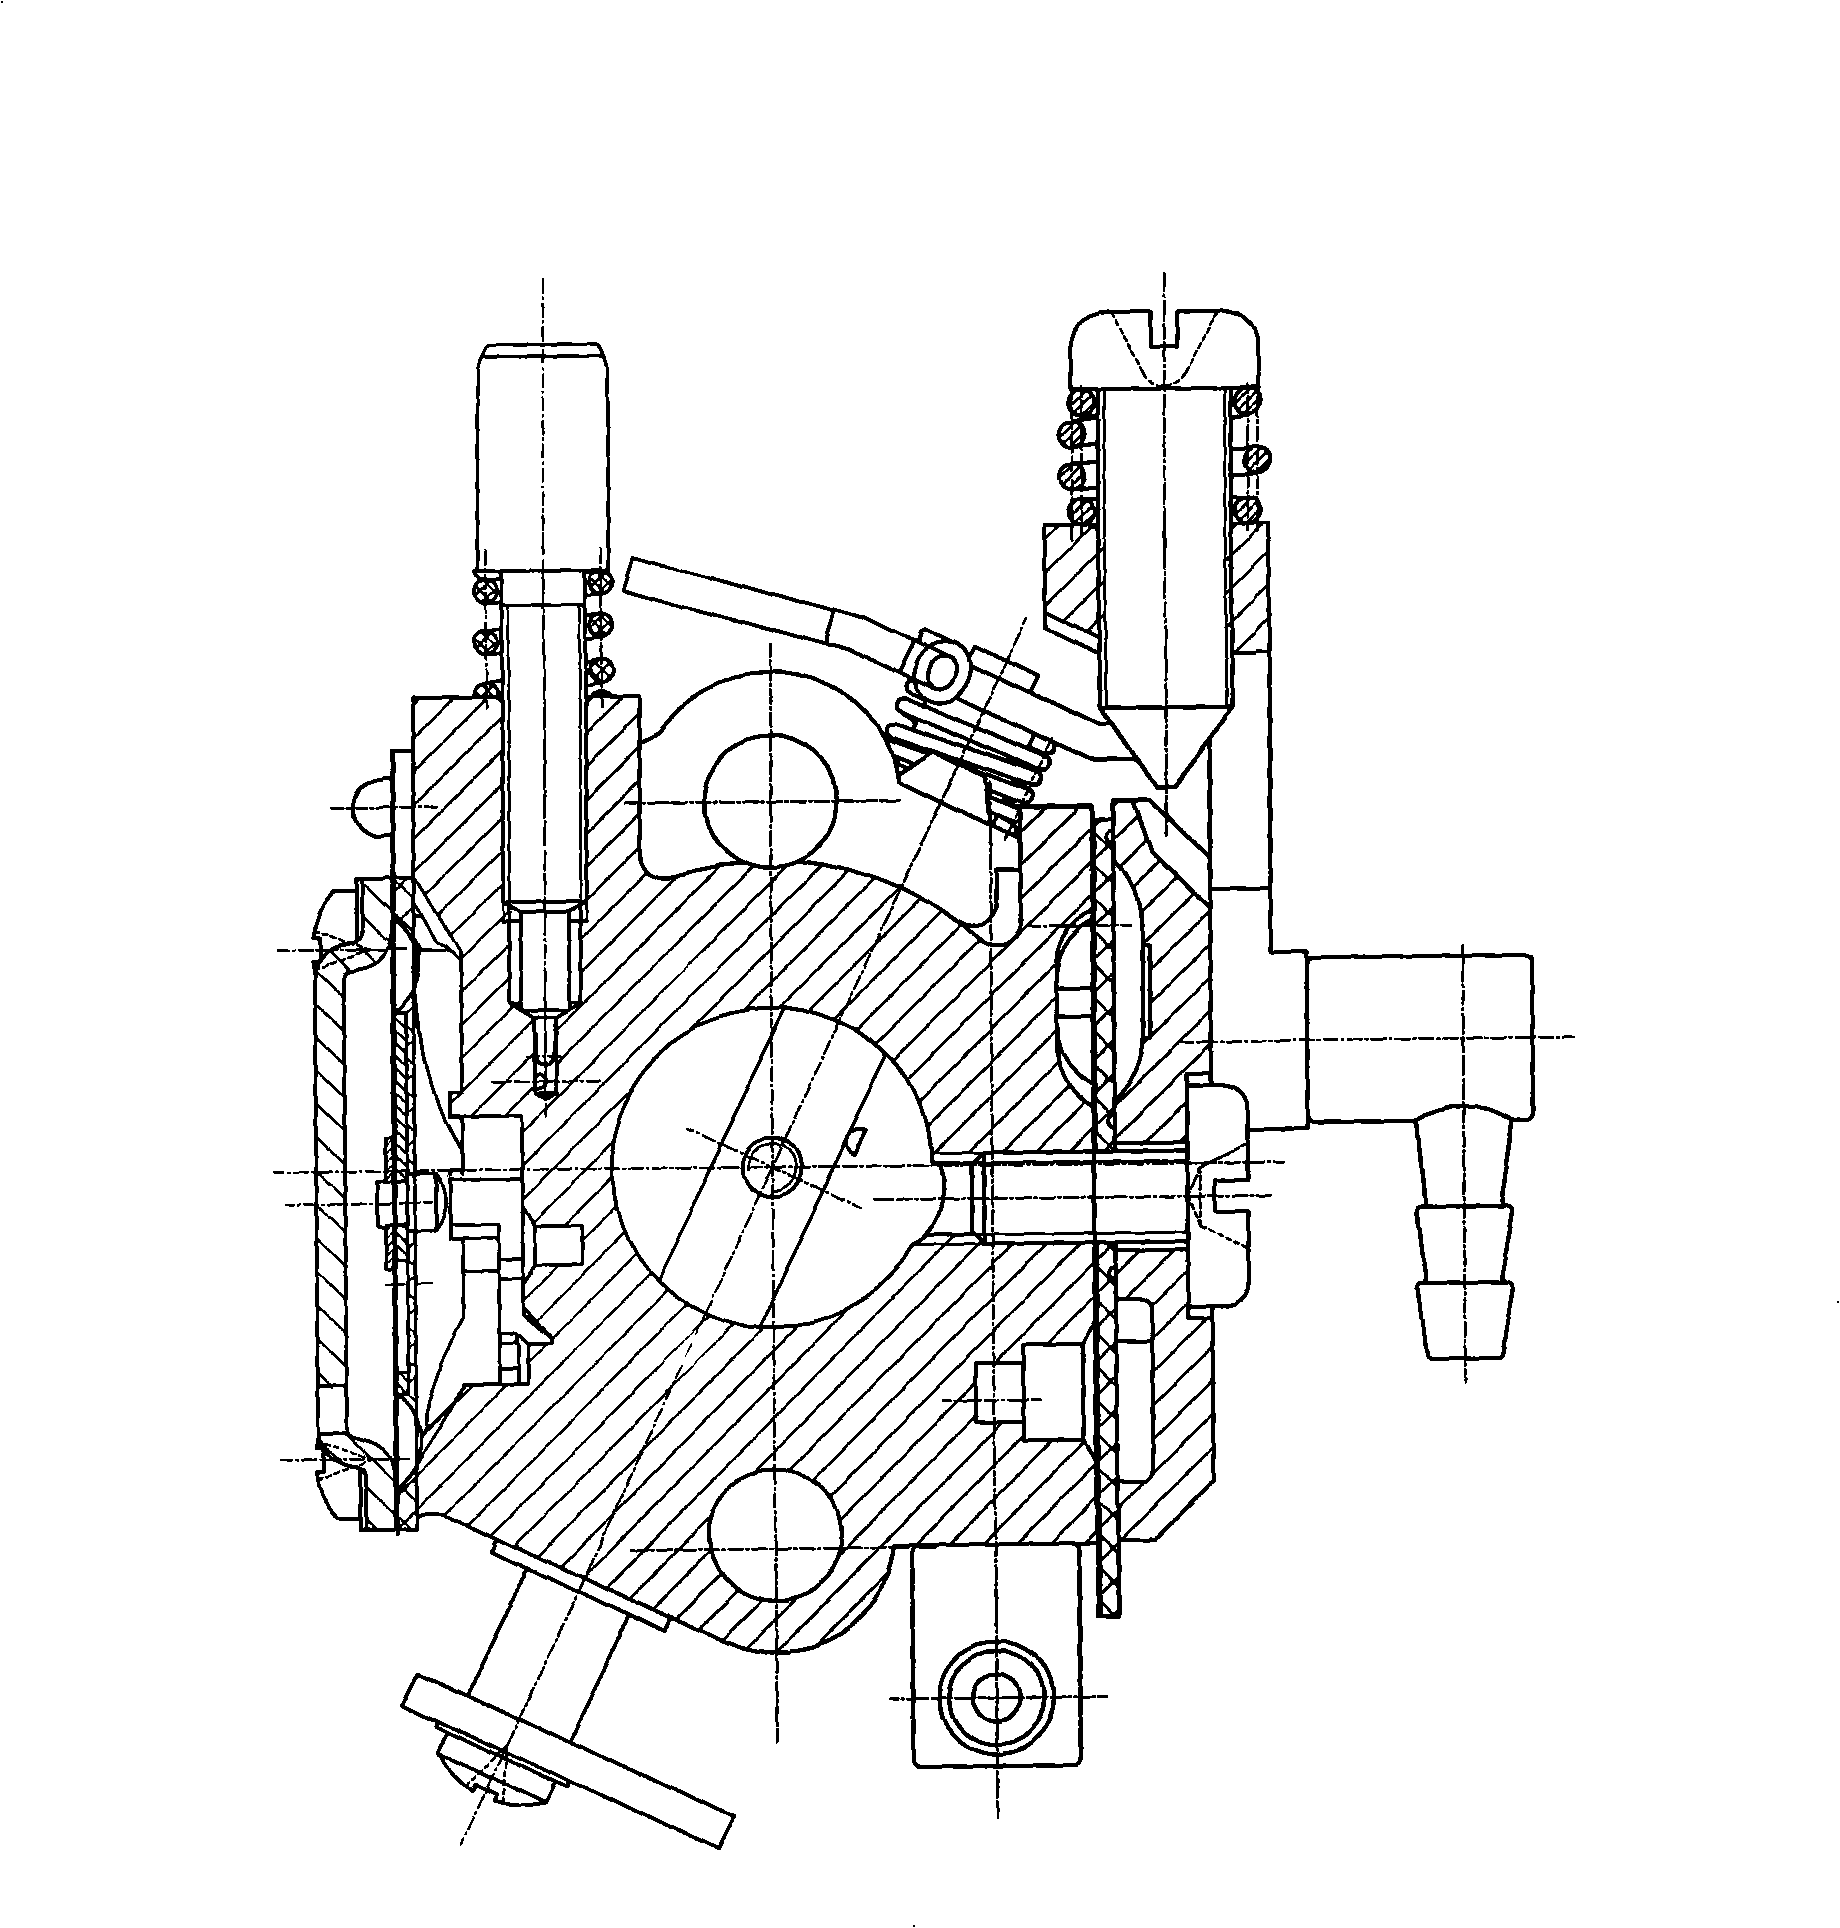 Carburetor for gasoline engine with needle valve provided with loose-proof sleeve